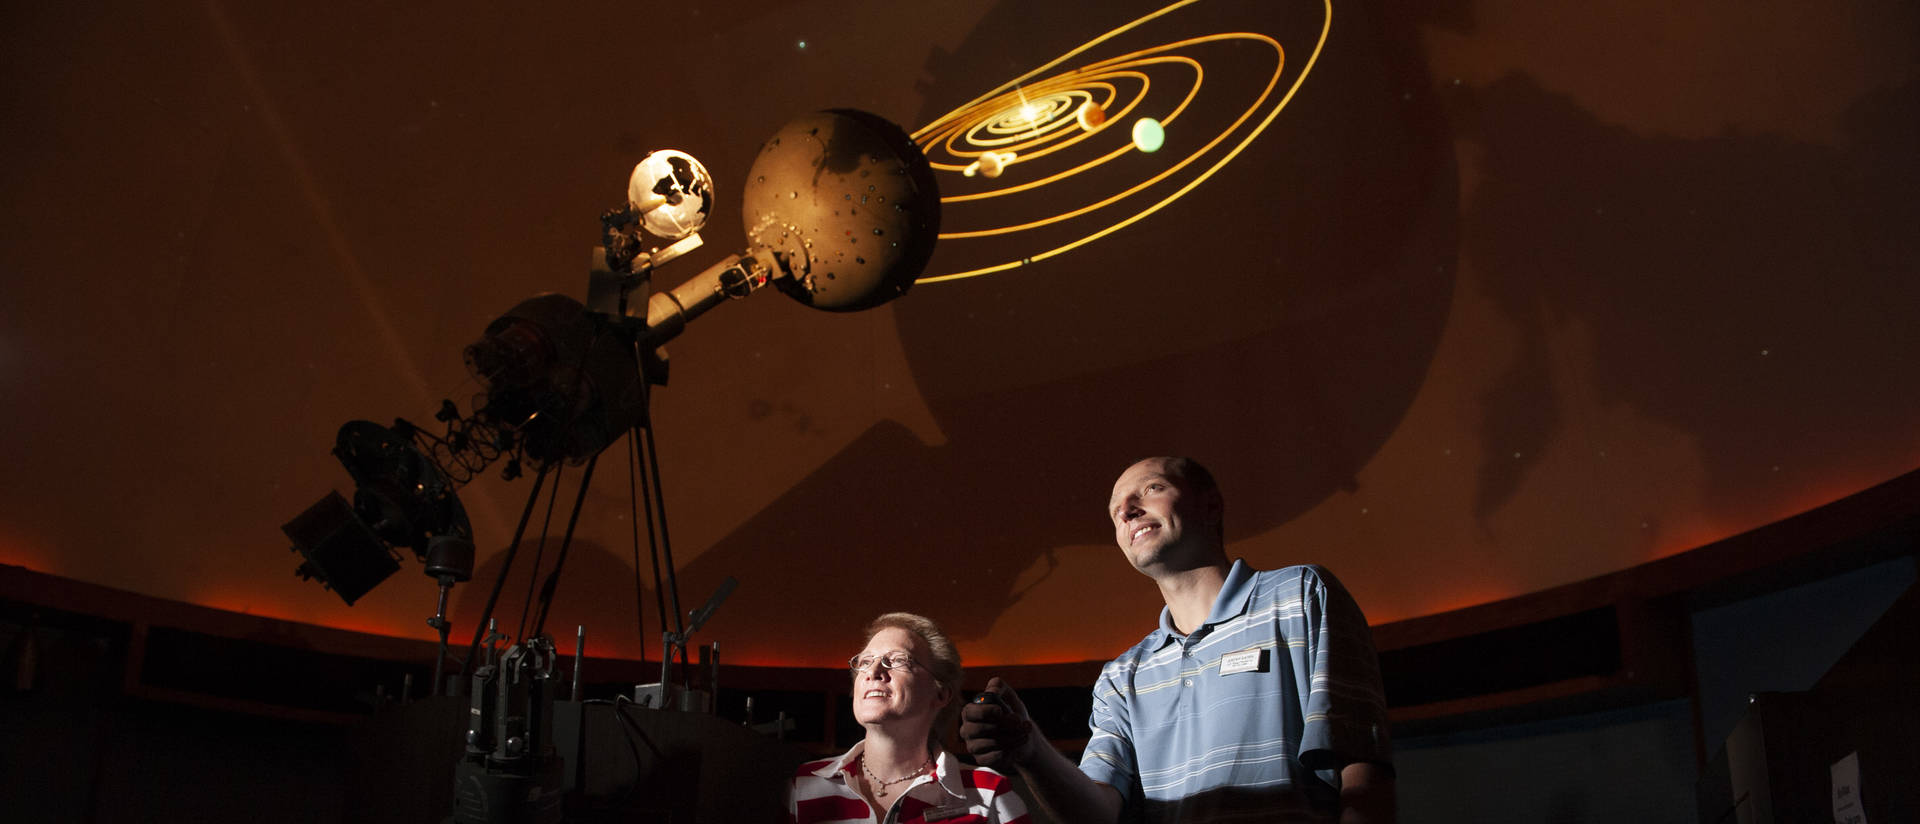 Image of the planets being projected on the ceiling of the L.E. Phillips Planetarium